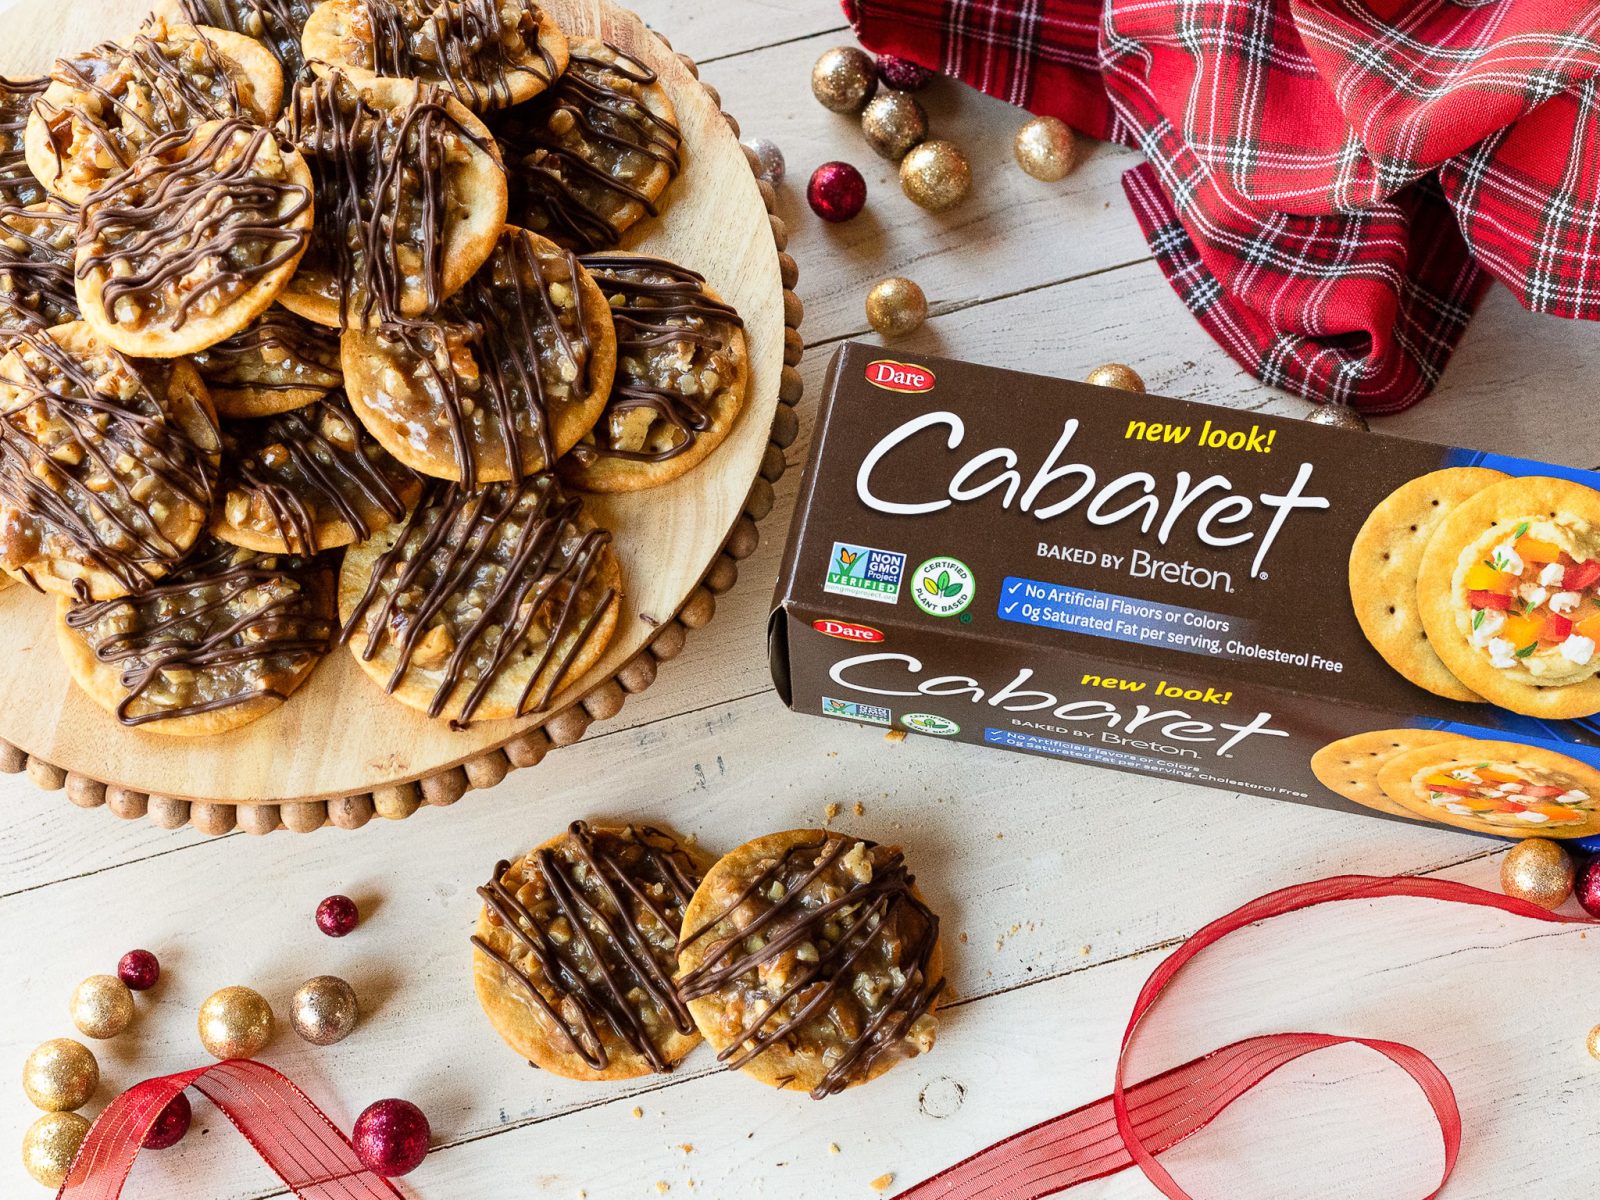 Stock Up On Breton® Crackers For All Your Holiday Needs – Save At Publix And Try A Batch Of My Caramel Pecan Crisps